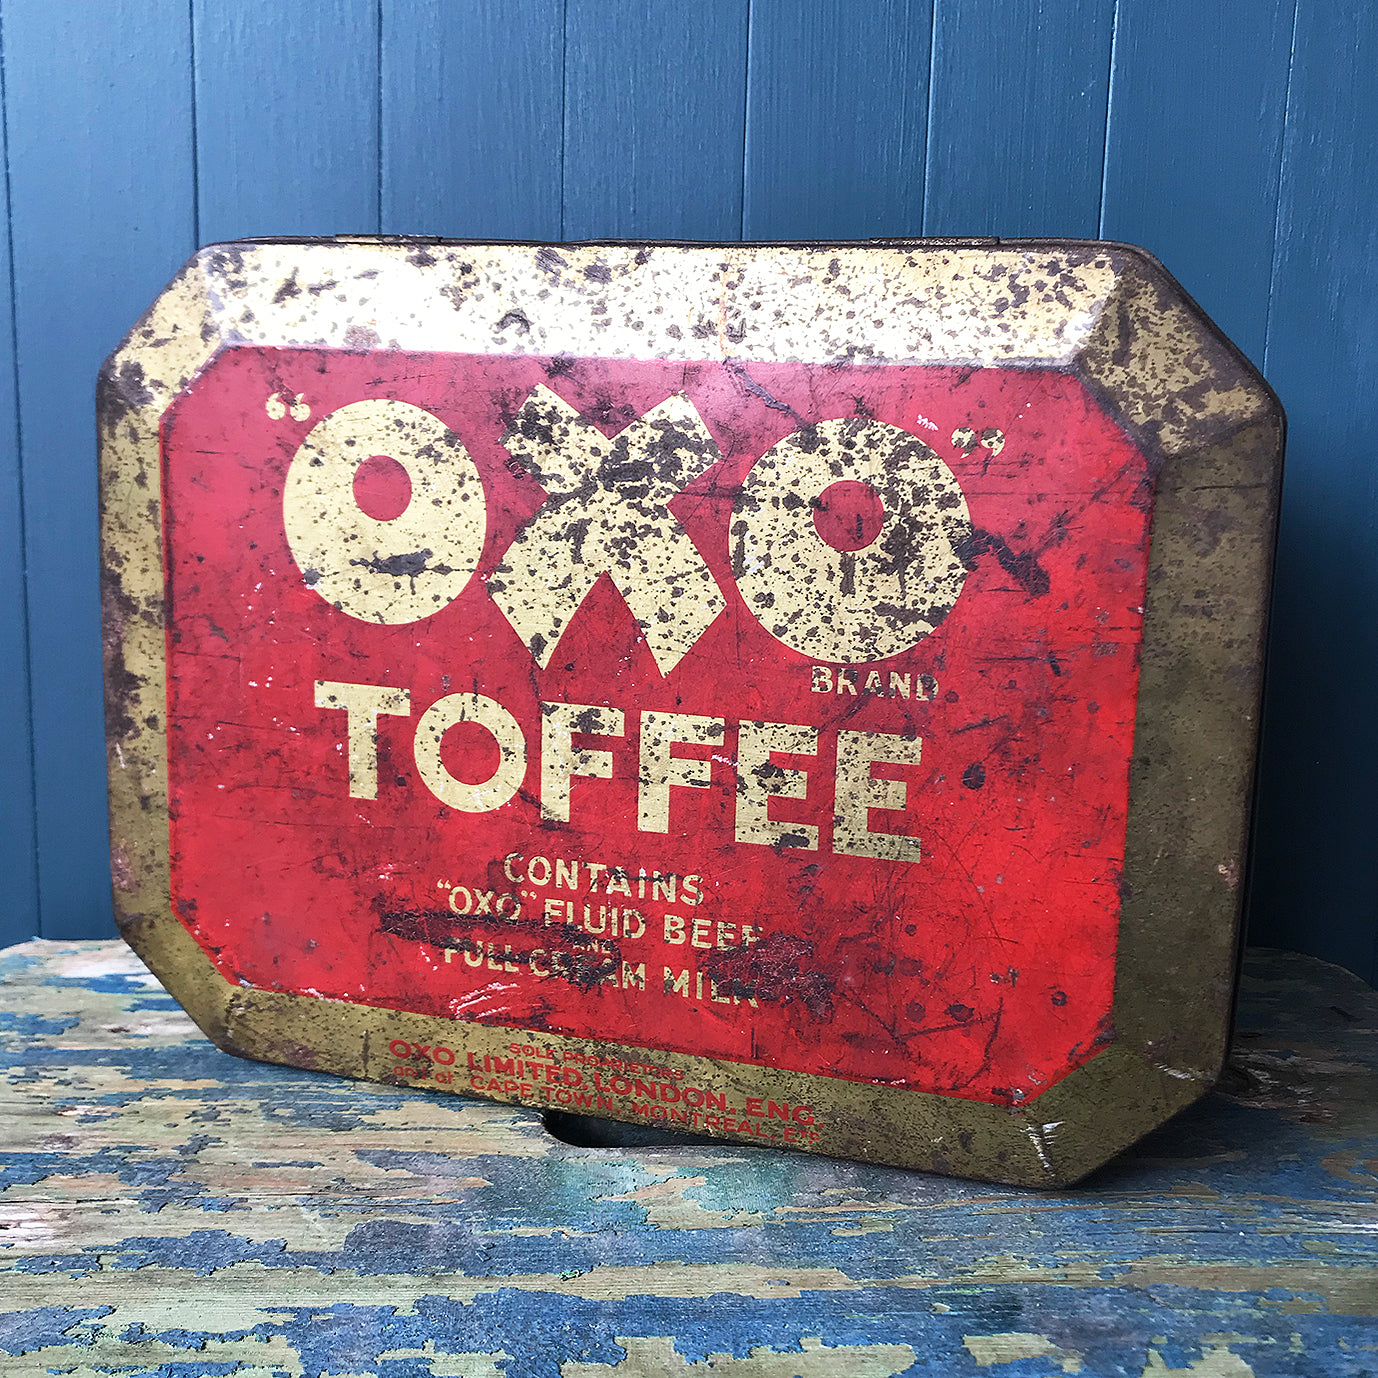 A rare OXO Toffee Tin made to hold the very short-lived product Oxo Toffee. The inside lid graphics state that the toffee&nbsp;"Contains Oxo Fluid Beef and Full-Cream Milk" - SHOP NOW - www.intovintage.co.uk